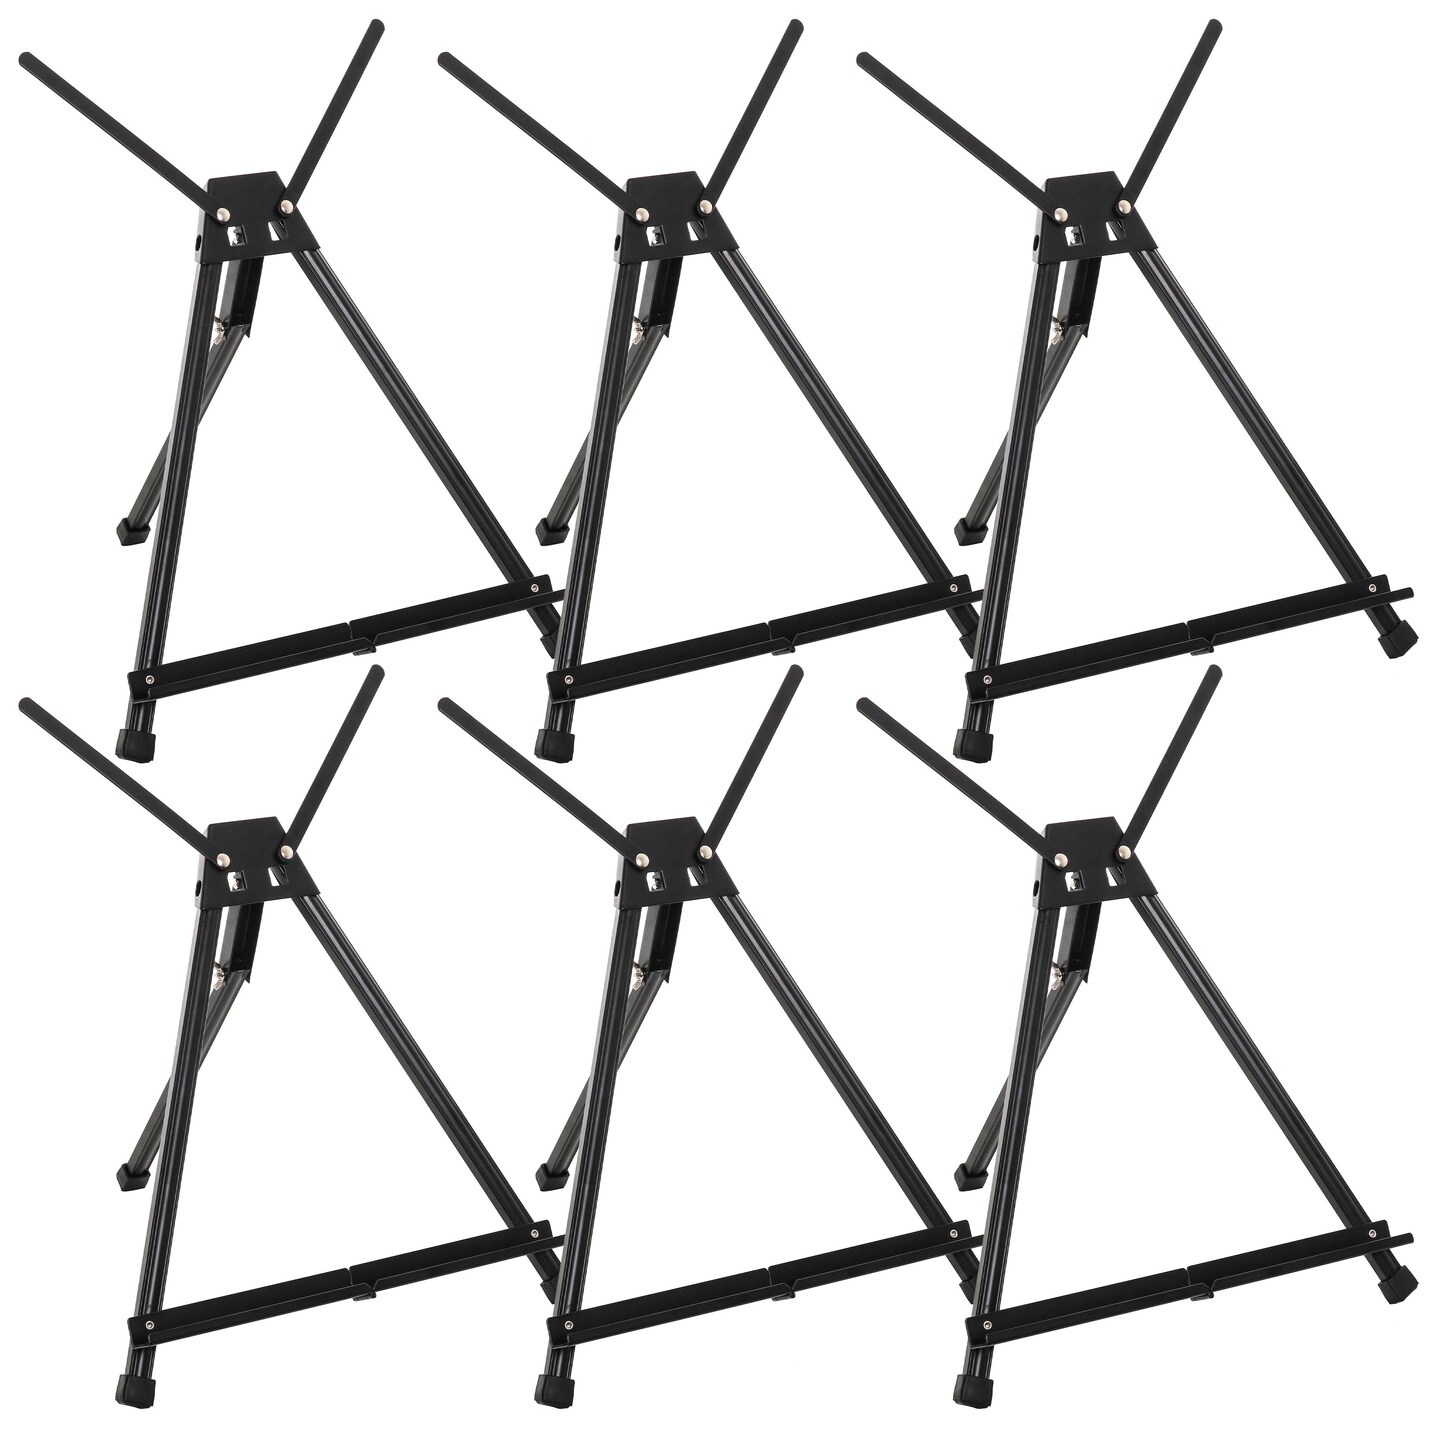 15&#x22; to 21&#x22; High Adjustable Black Aluminum Tabletop Display Easel (Pack of 6) - Portable Artist Tripod Stand with Extension Arm Wings, Folding Frame